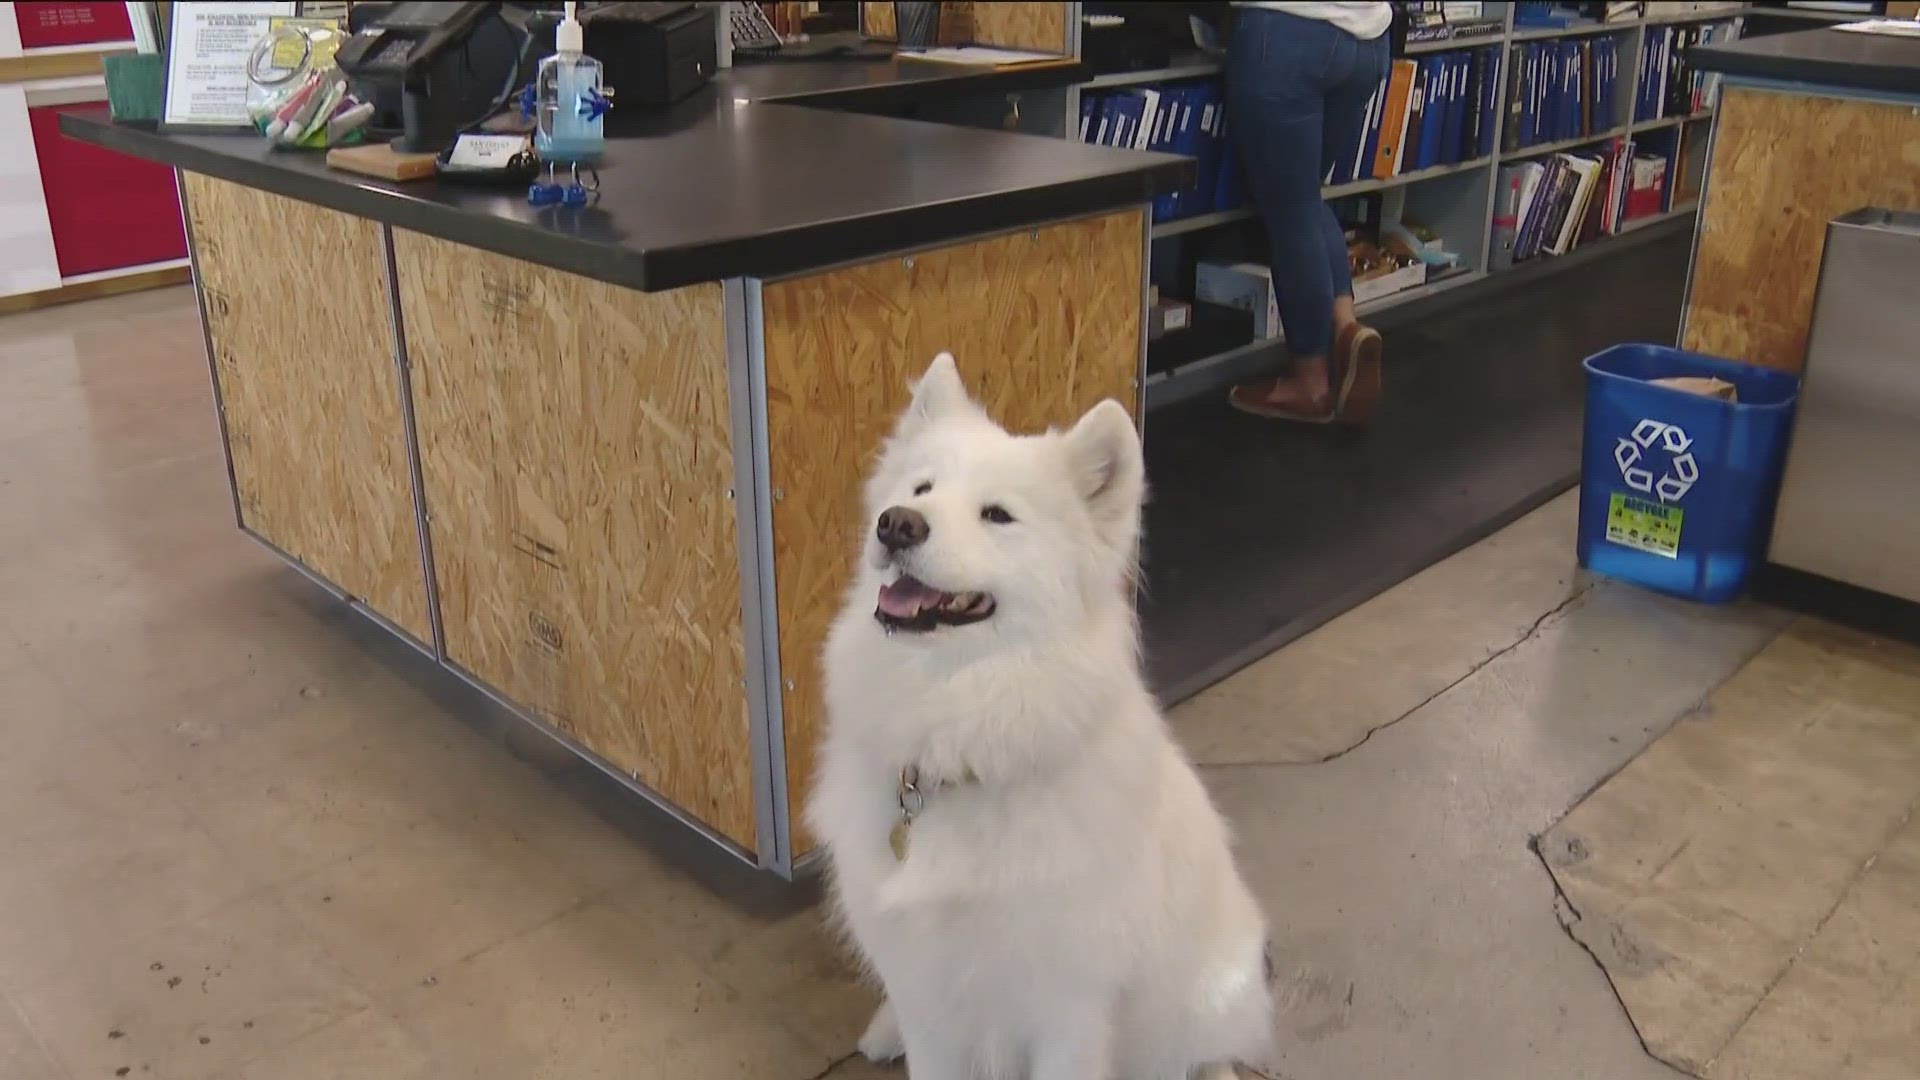 She gets paid in treats and brightens the day of those who come to the 131-year-old store.